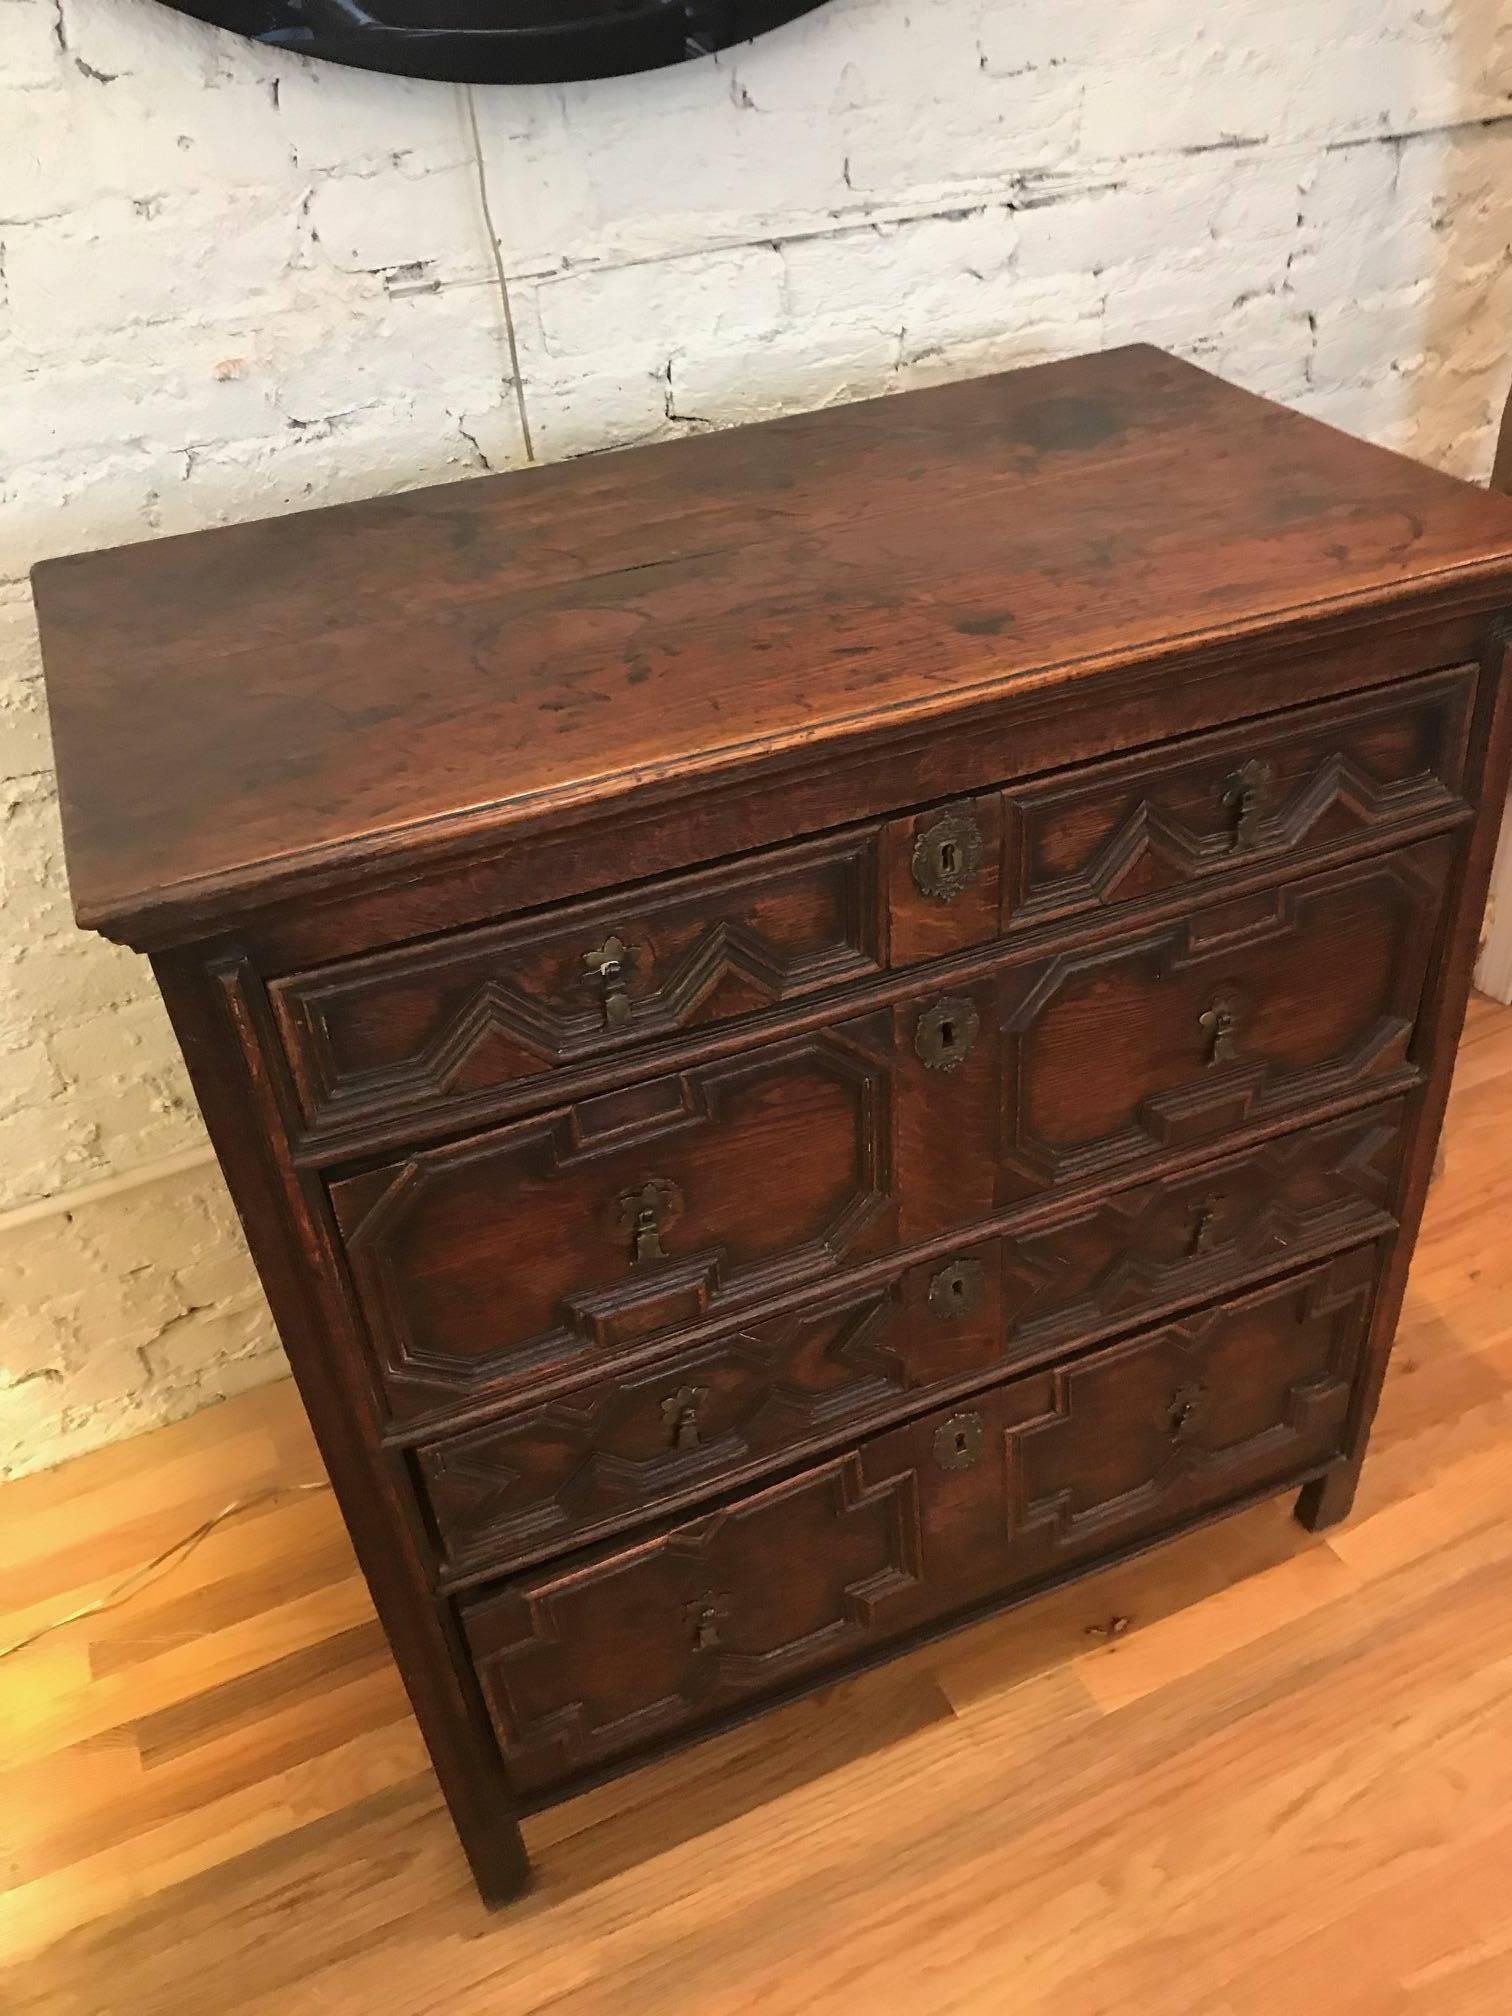 Magnificent English Charles II oak chest of drawers. It front drawers features bold geometric moldings.